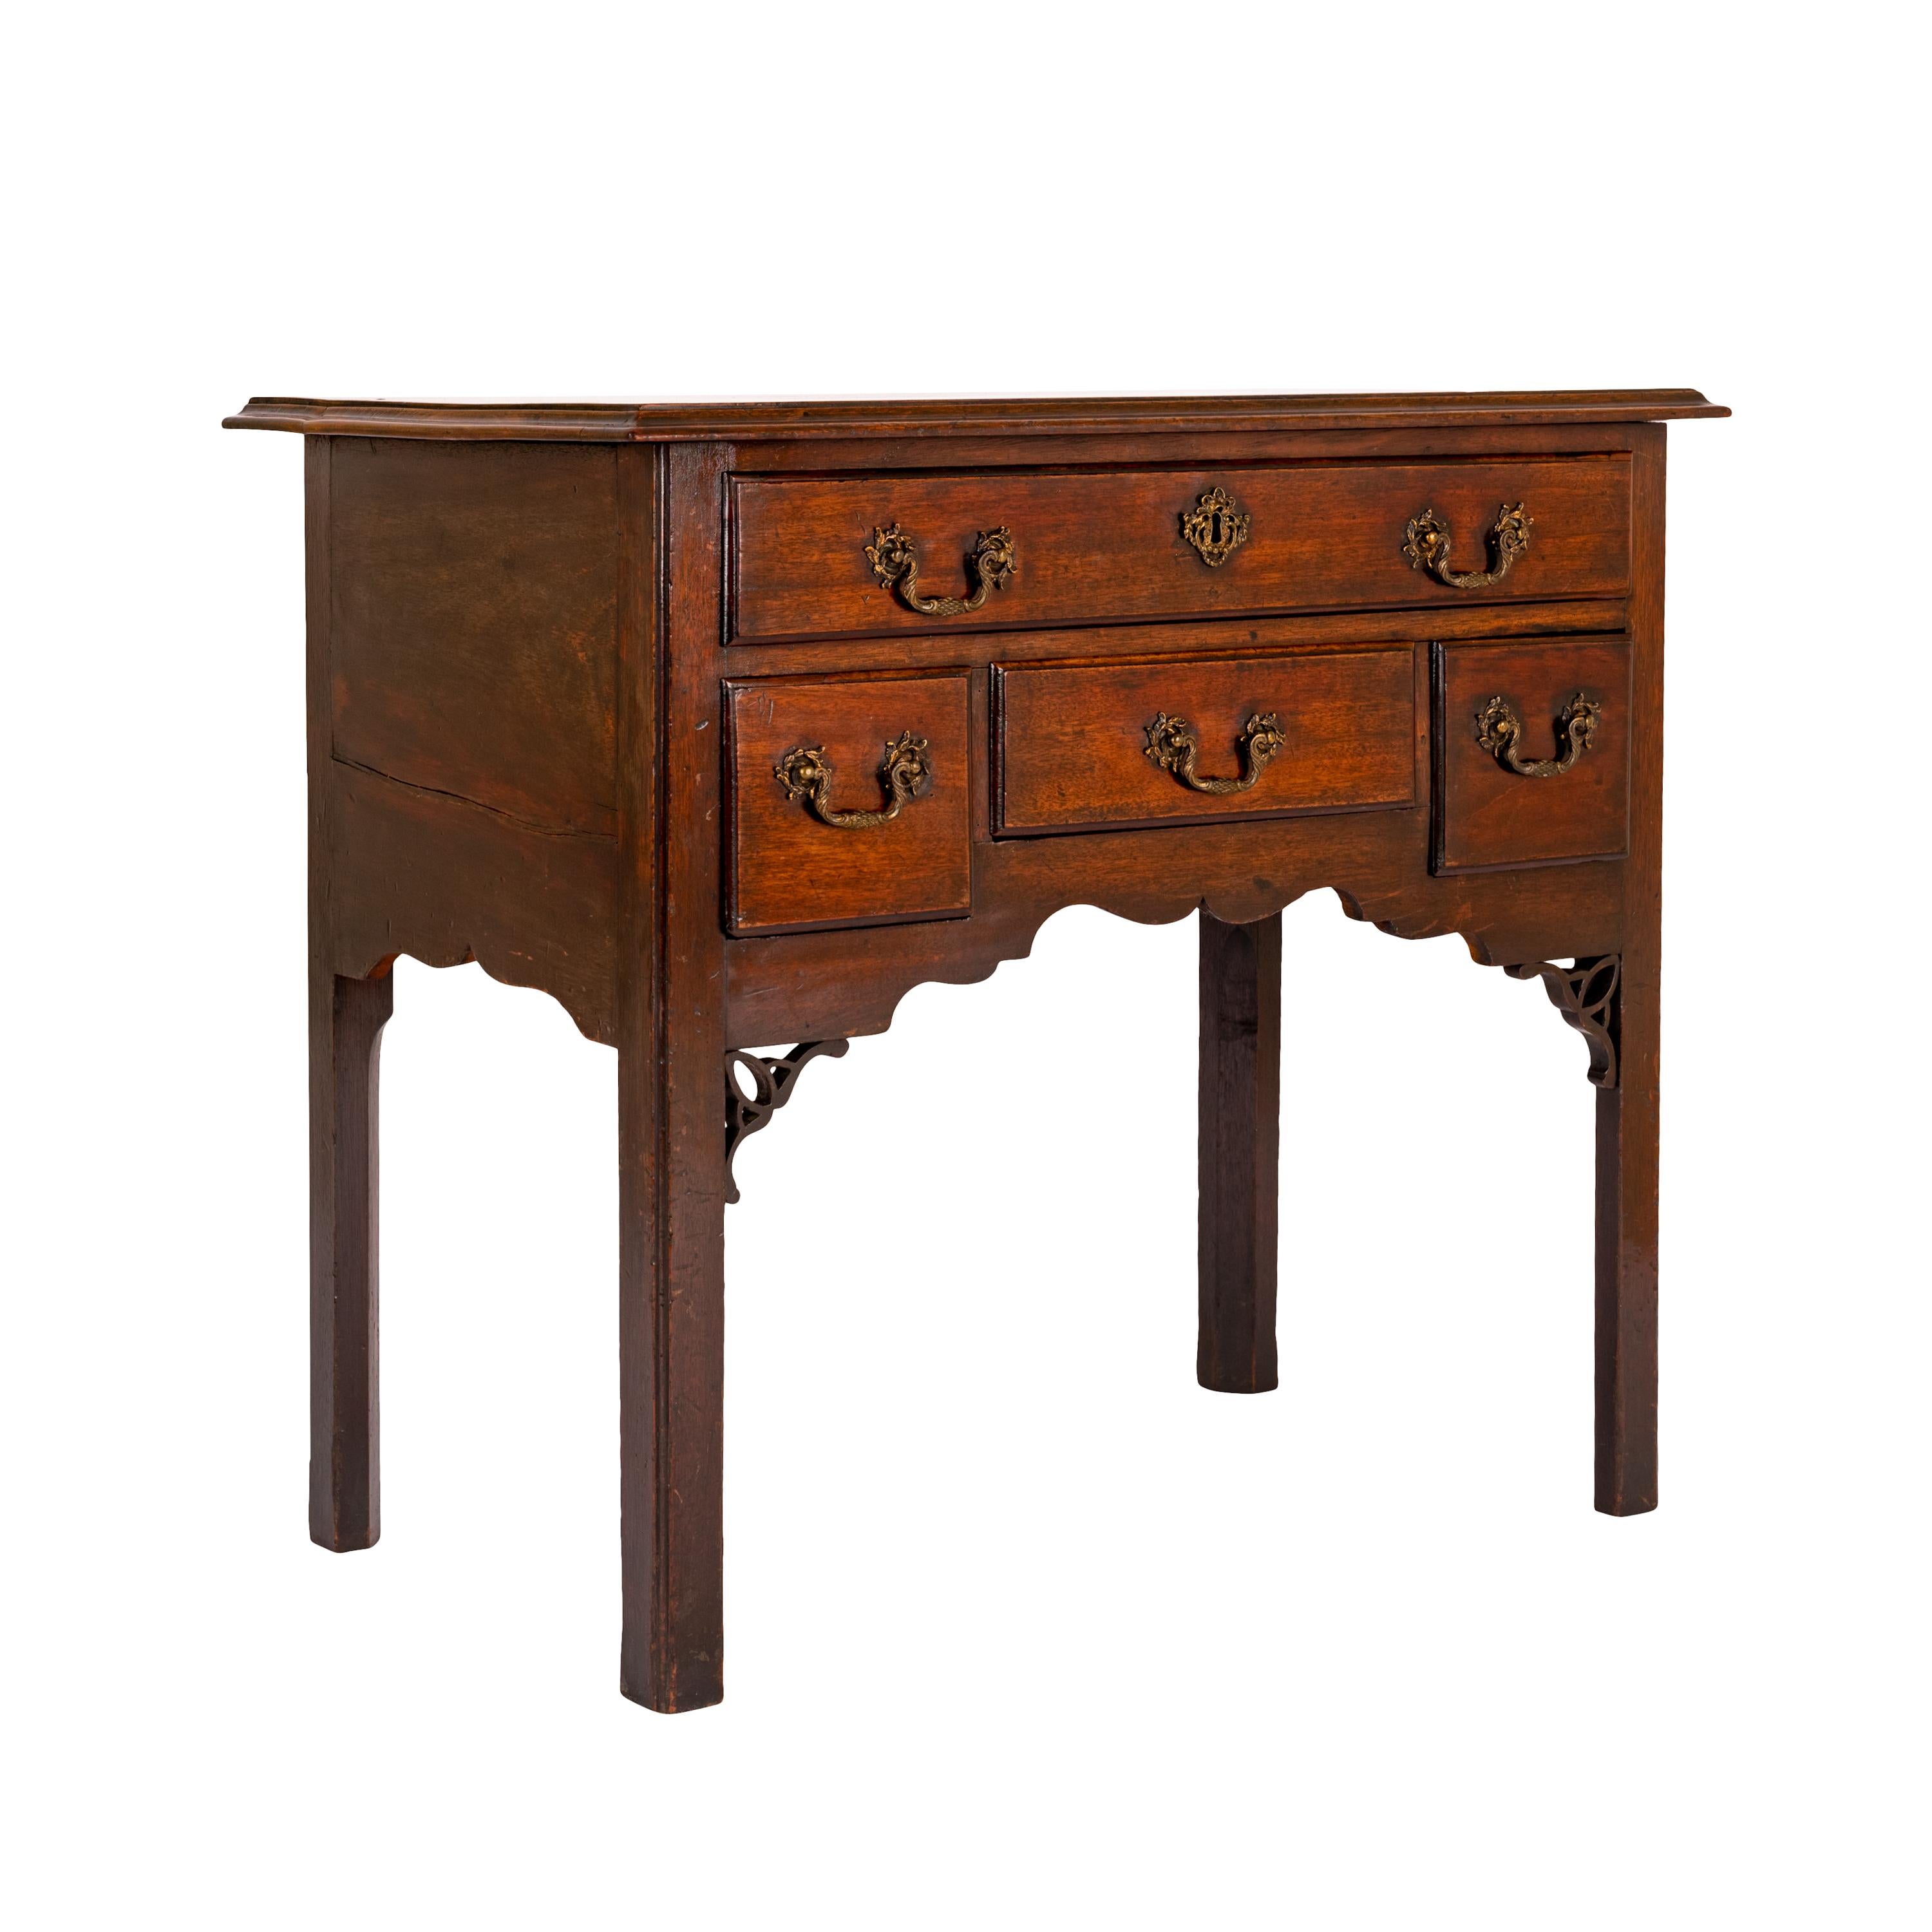 Antique English 18th C Georgian Mahogany Chippendale Lowboy Side Table 1750 For Sale 2